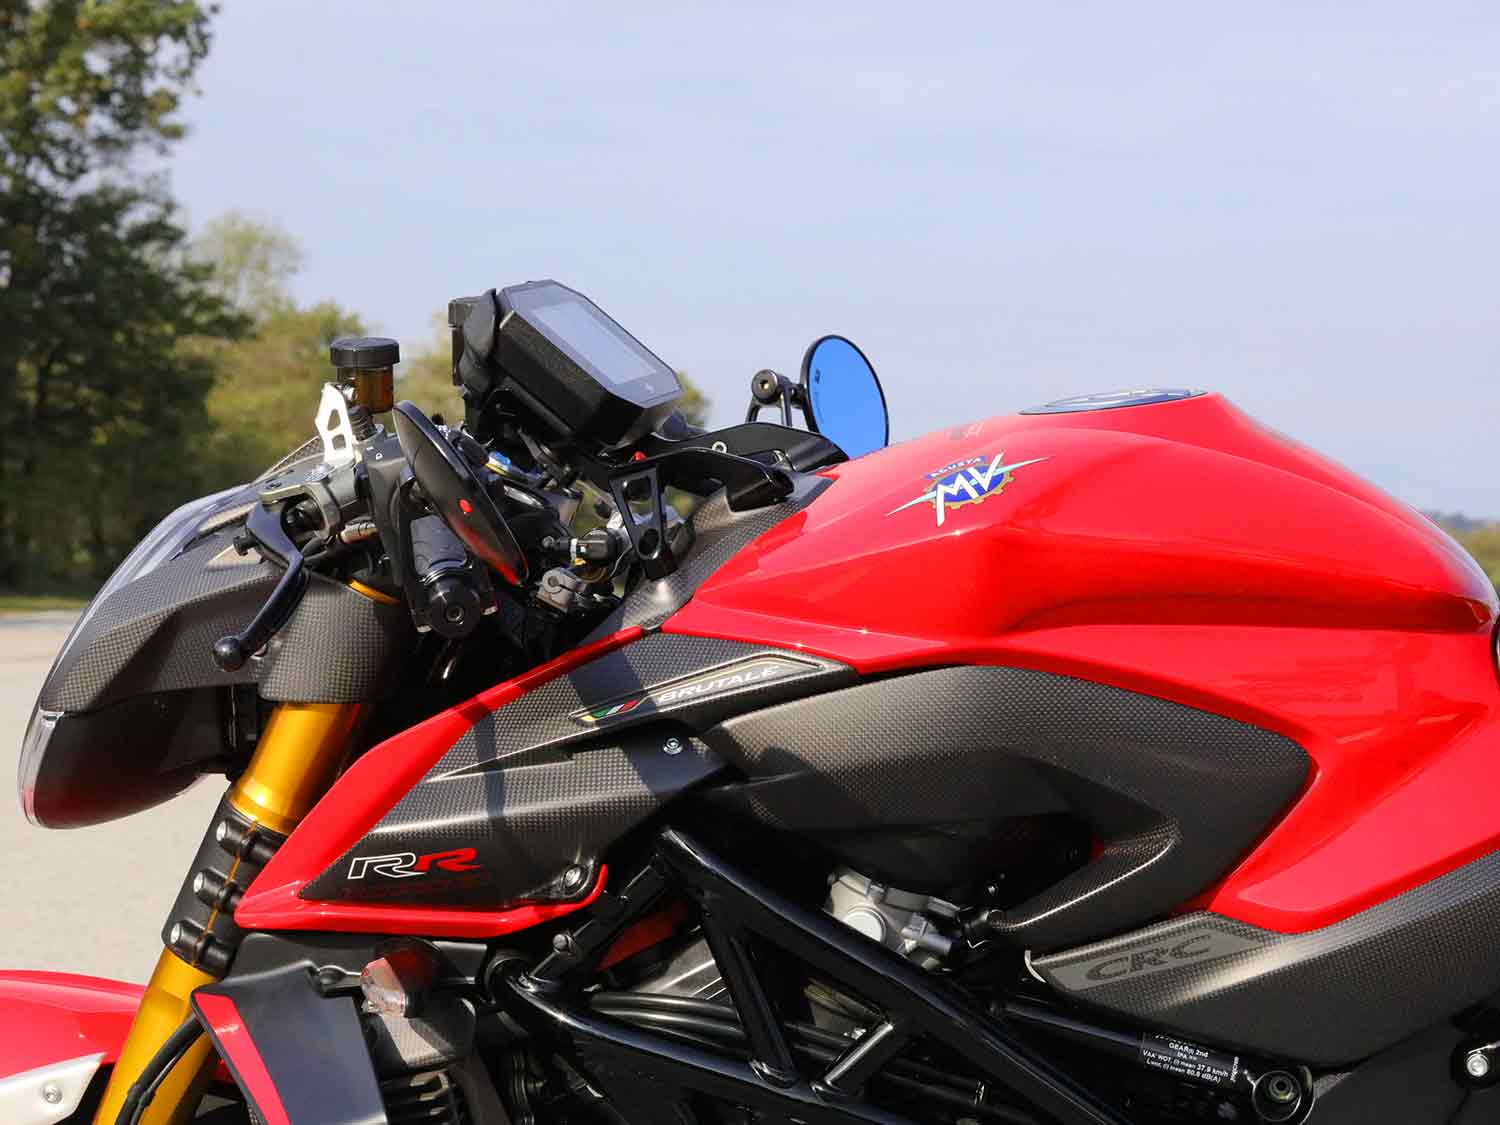 2020 MV Agusta Brutale 1000 RR First Look (11 Fast Facts)